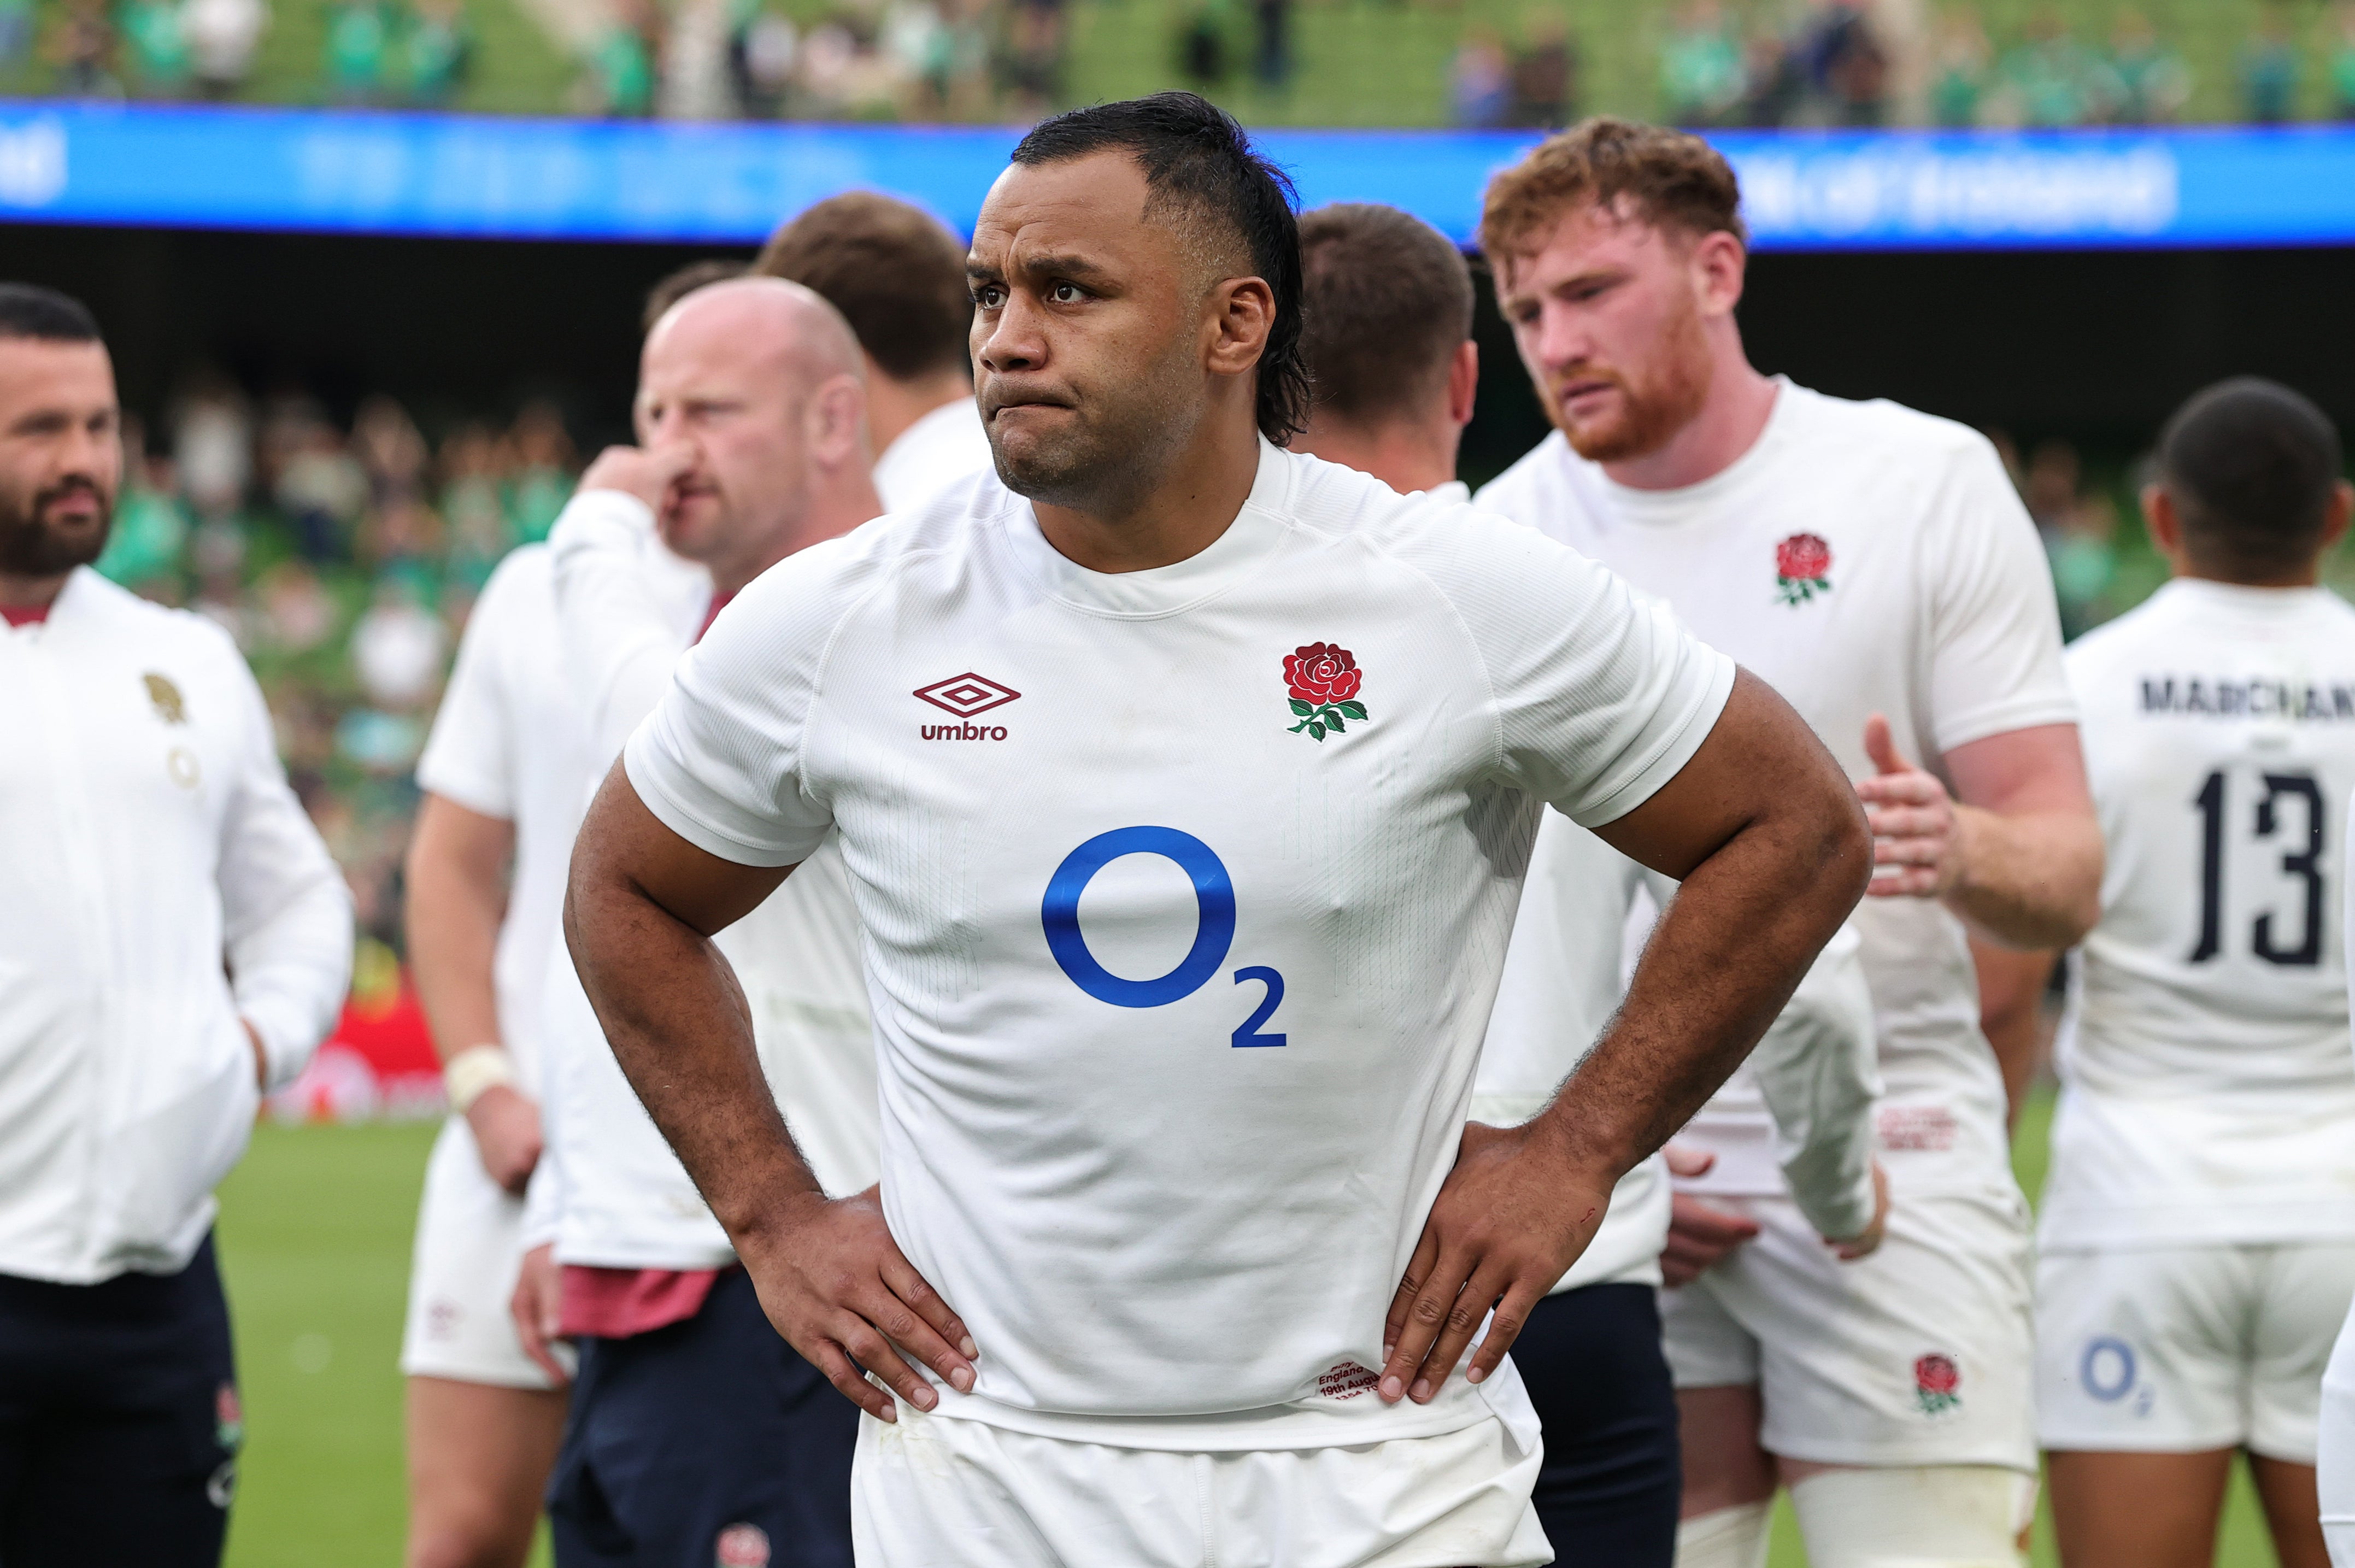 Billy Vunipola’s England career appears to be at an end